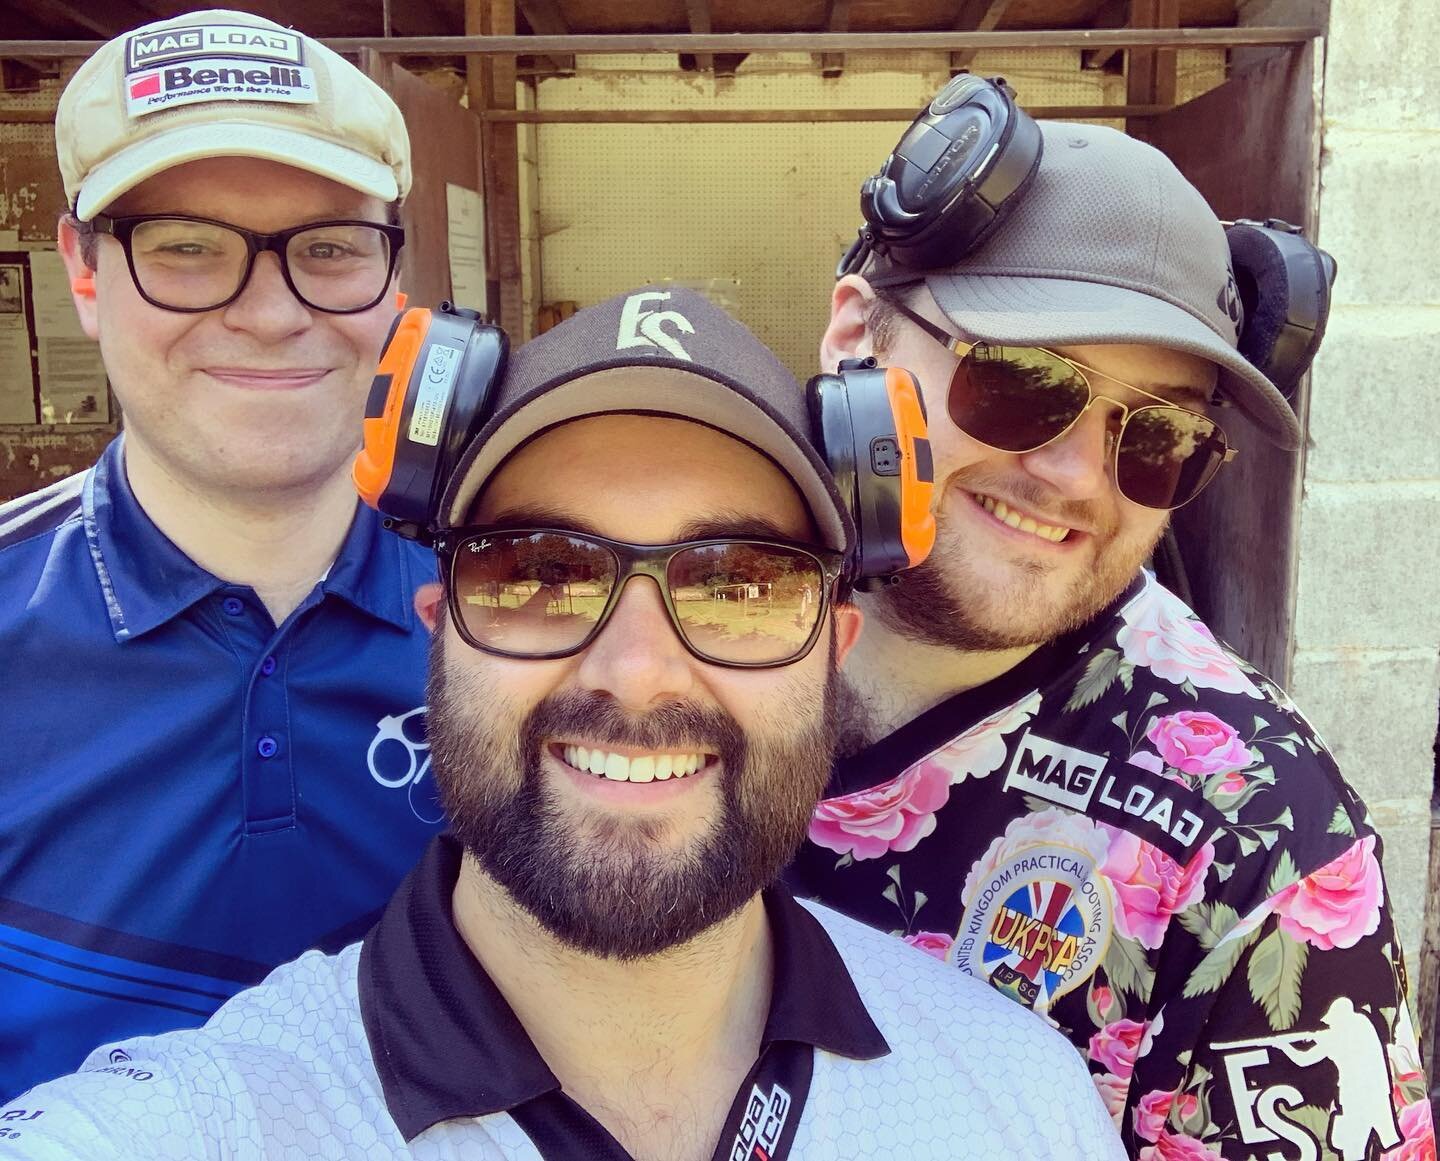 An end to another great match, the biggest highlight, getting to spend time with friends and properly catching up. Things are feeling normal again! 

#shooting #gun  #guns #englishshooting #minirifle #ukpsa #ipsc #rifle #competition #match #sport #in